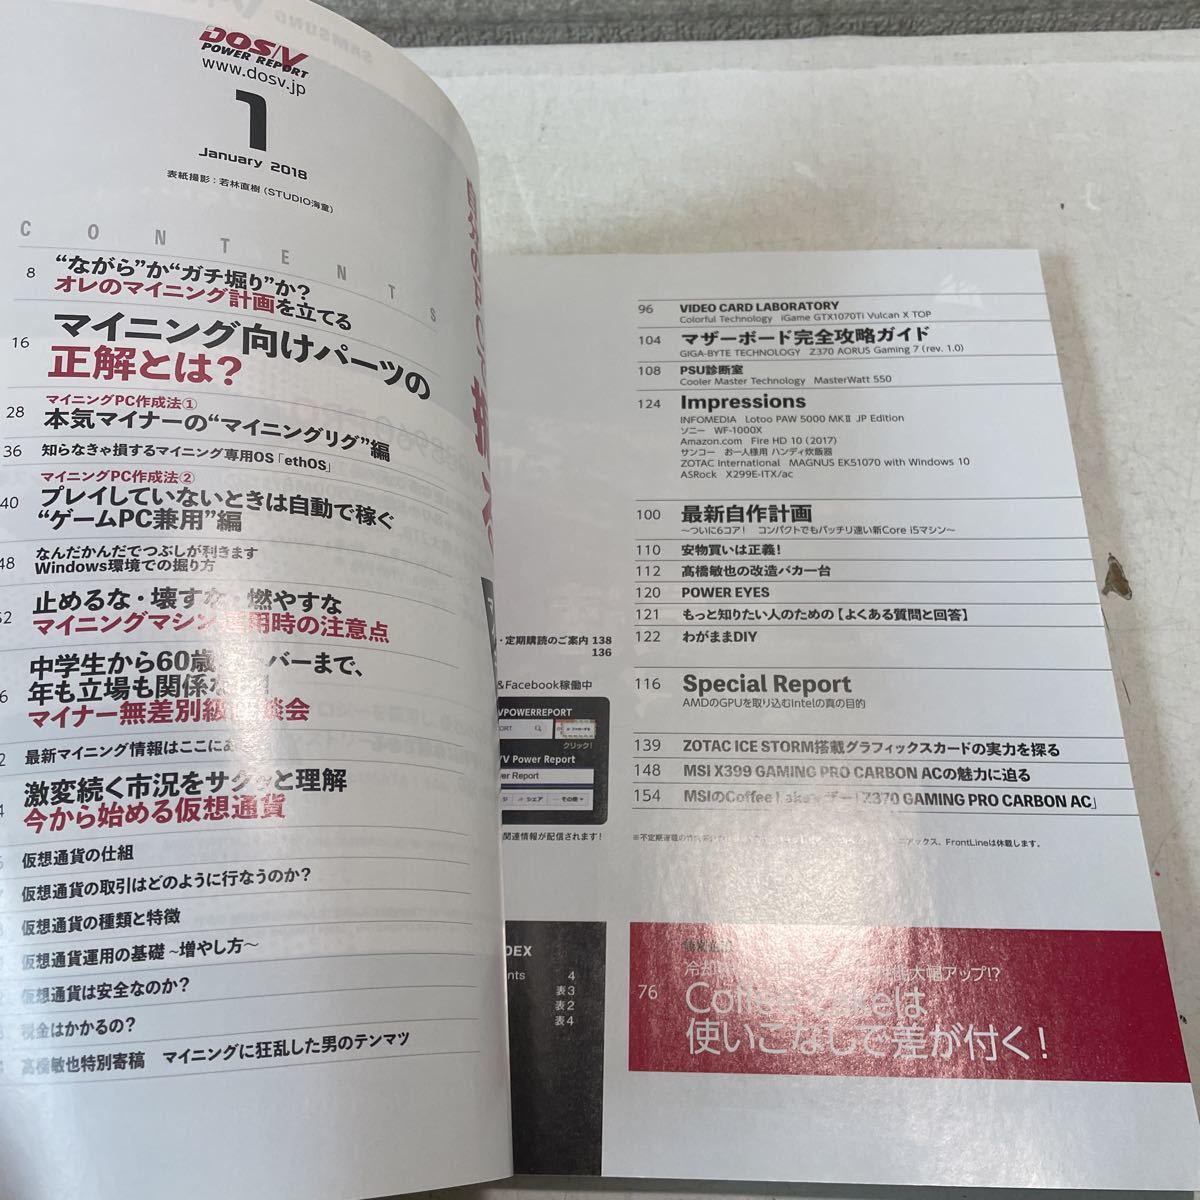 230210★U00★DOS/V POWER REPORT ドスブイパワーレポート 2018年1月号〜12月号 揃い12冊セット★パソコン誌